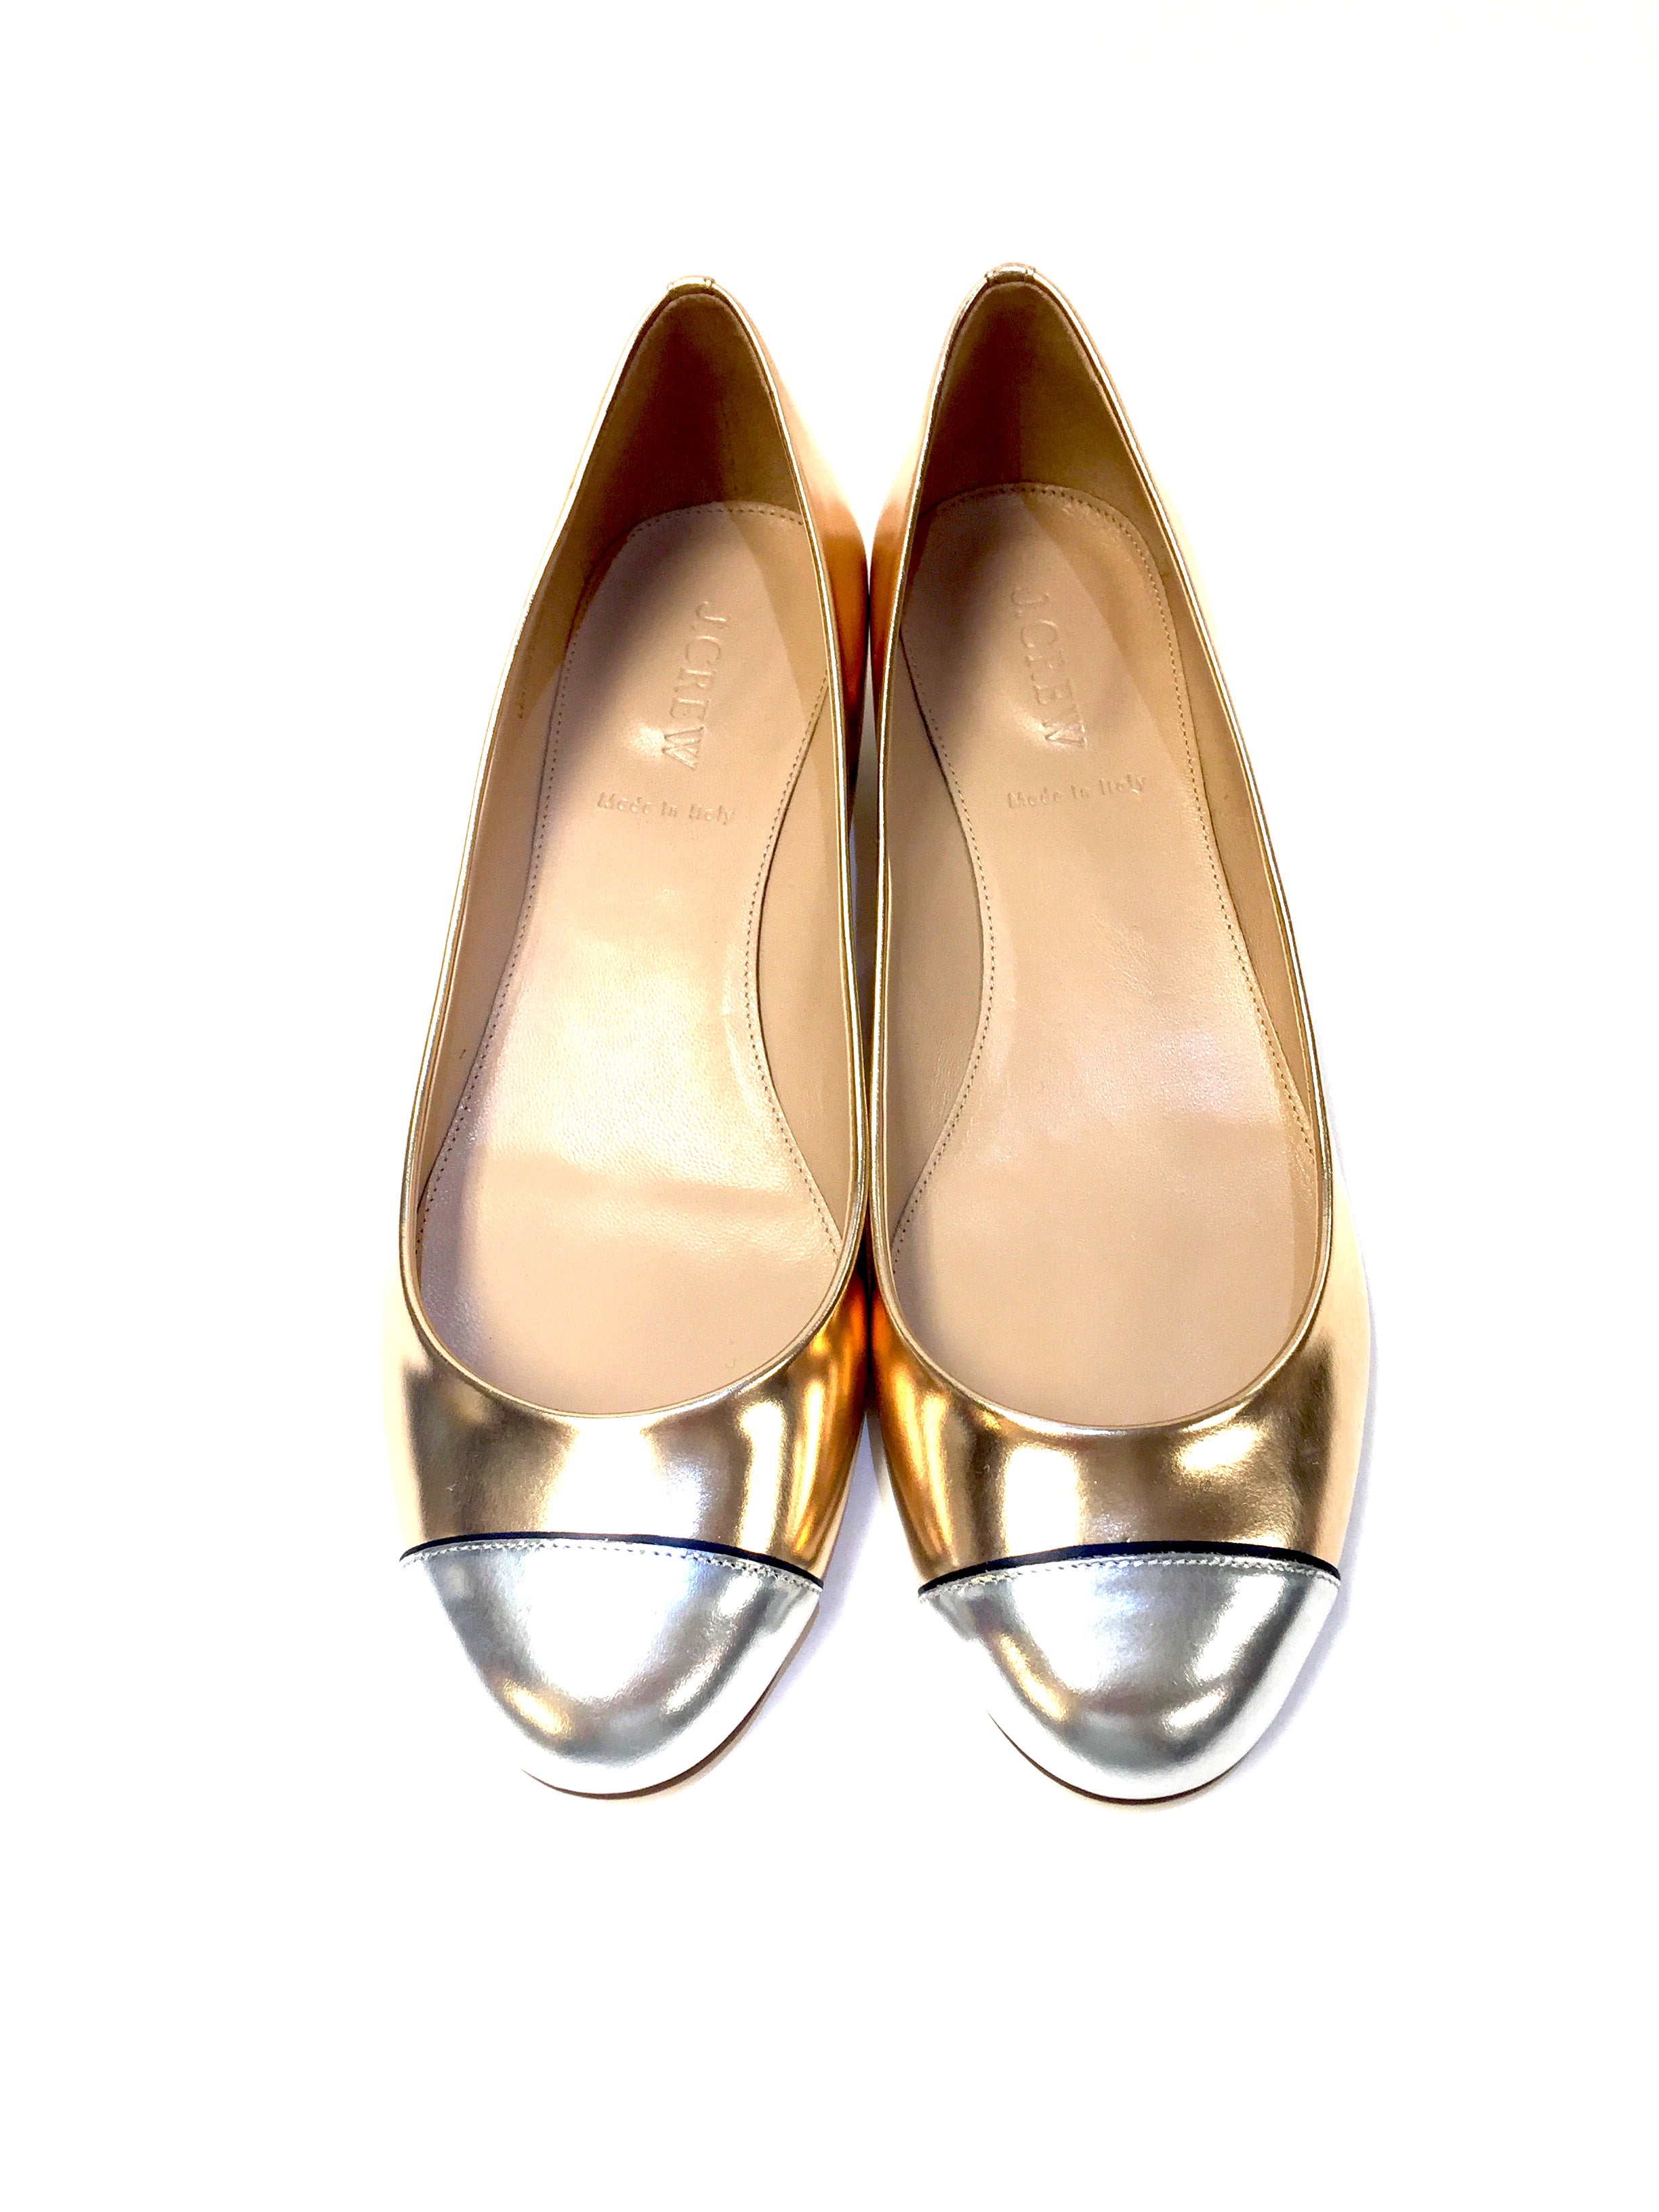 J. CREW New Gold Leather Silver Cap Toe 